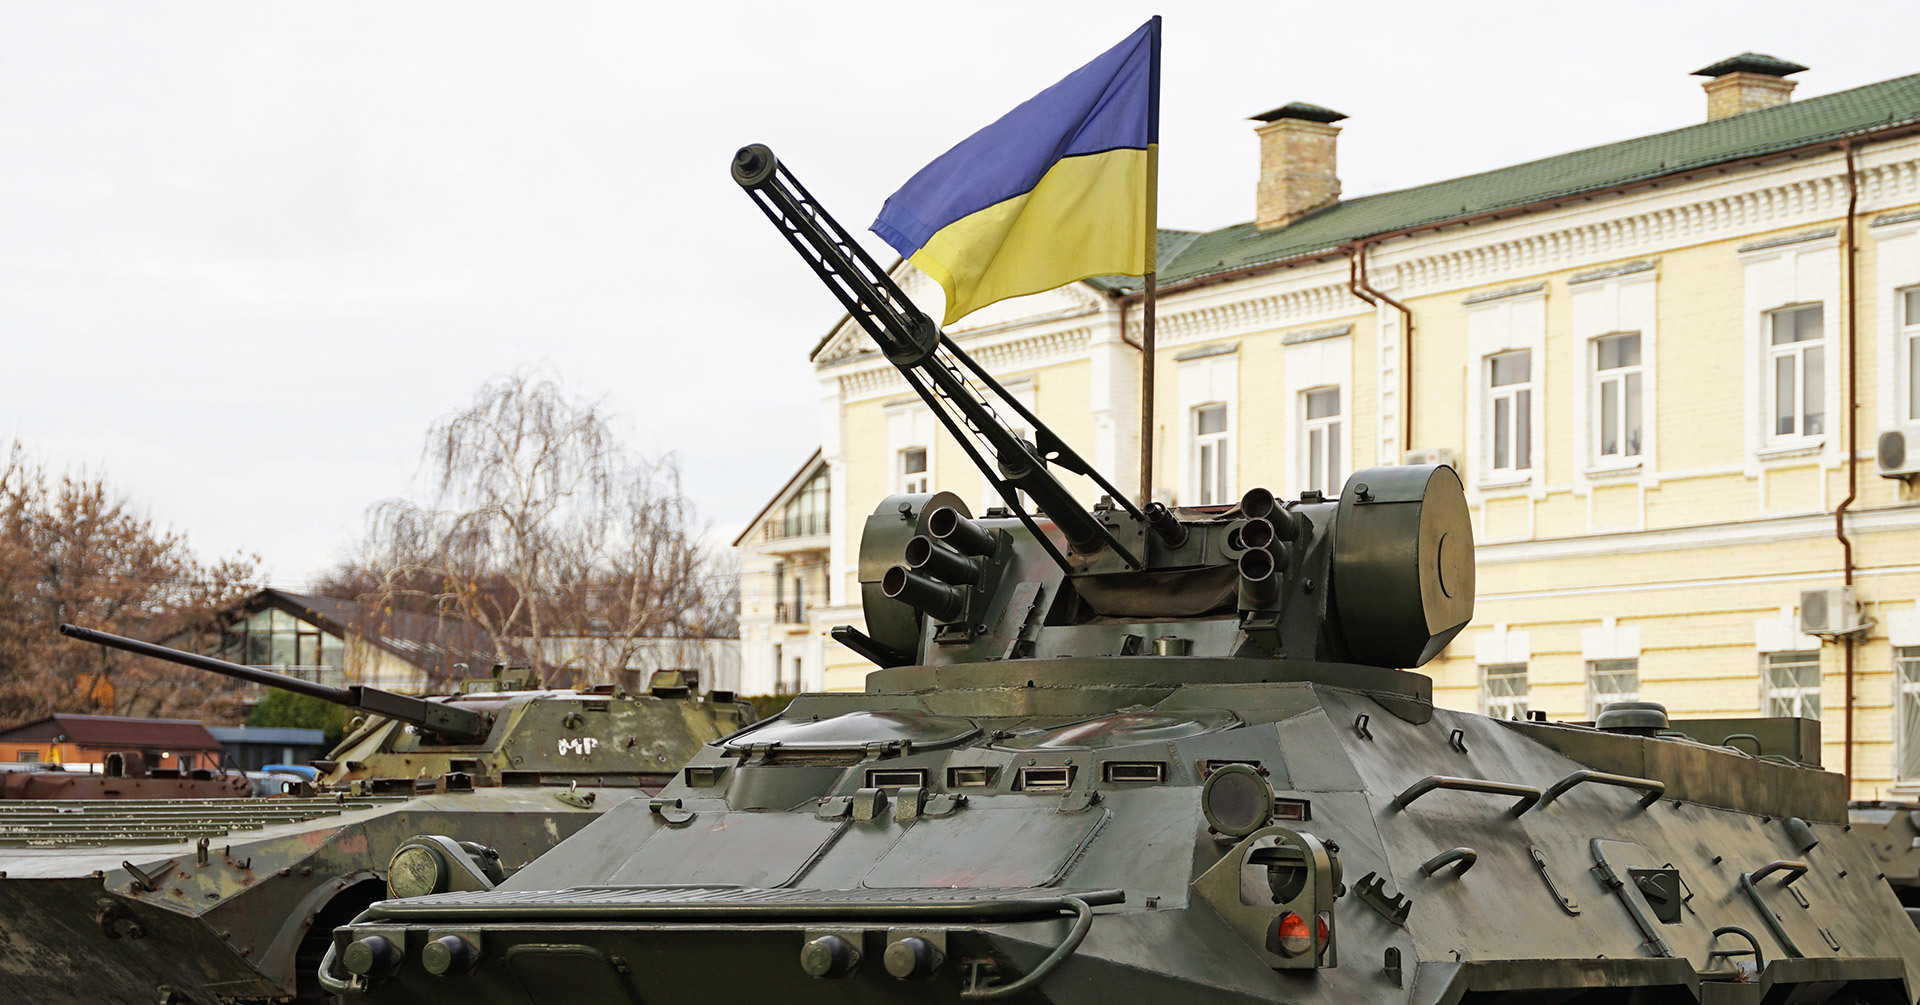 Military vehicle in foreground with Ukraine flag behind